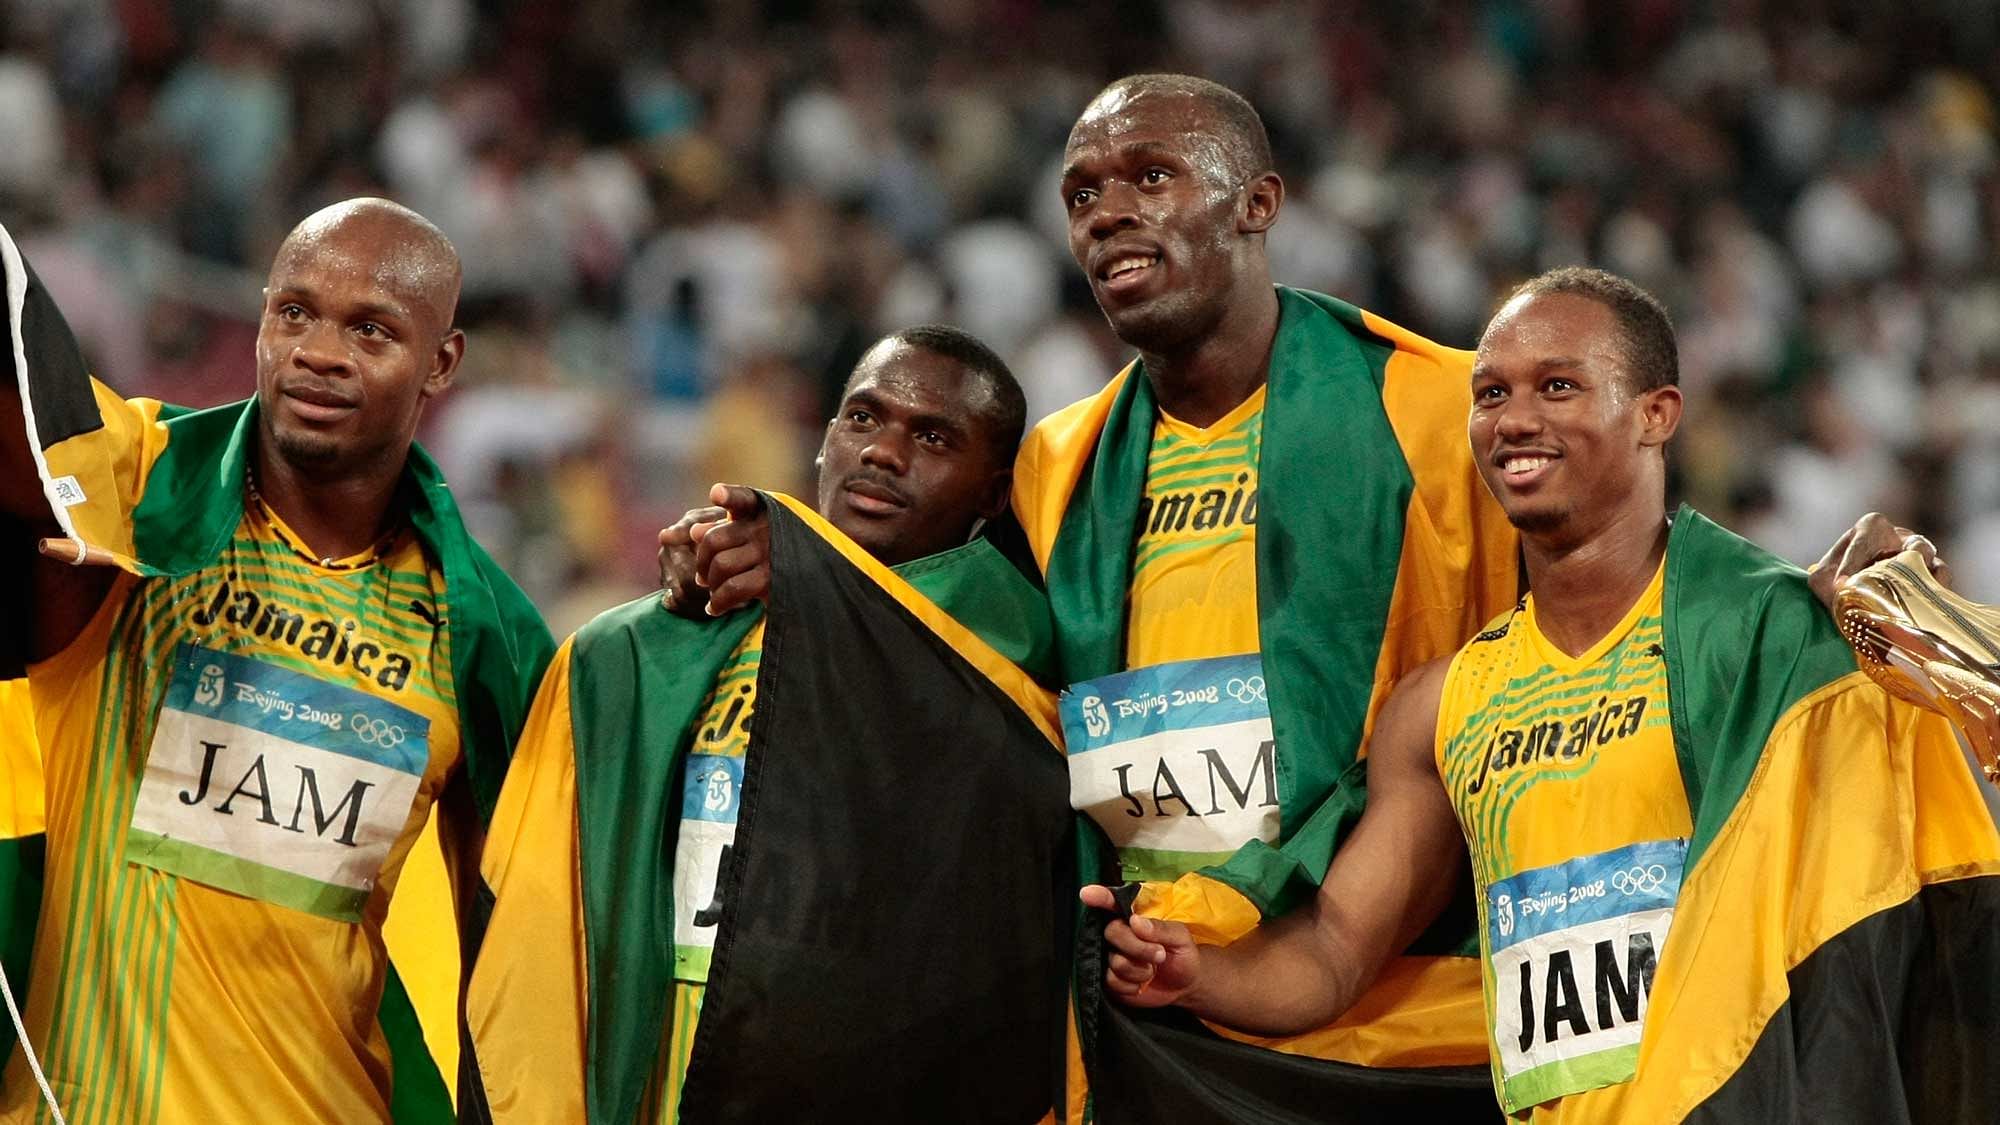 In this Friday, Aug. 22, 2008 file photo, Jamaica’s gold medal winning relay team, Usain Bolt, 2nd right, Michael Frater, right, Asafa Powell, left, and Nesta Carter celebrate after the men’s 4x100-meter relay final at the Beijing 2008 Olympics. (Photo: AP)